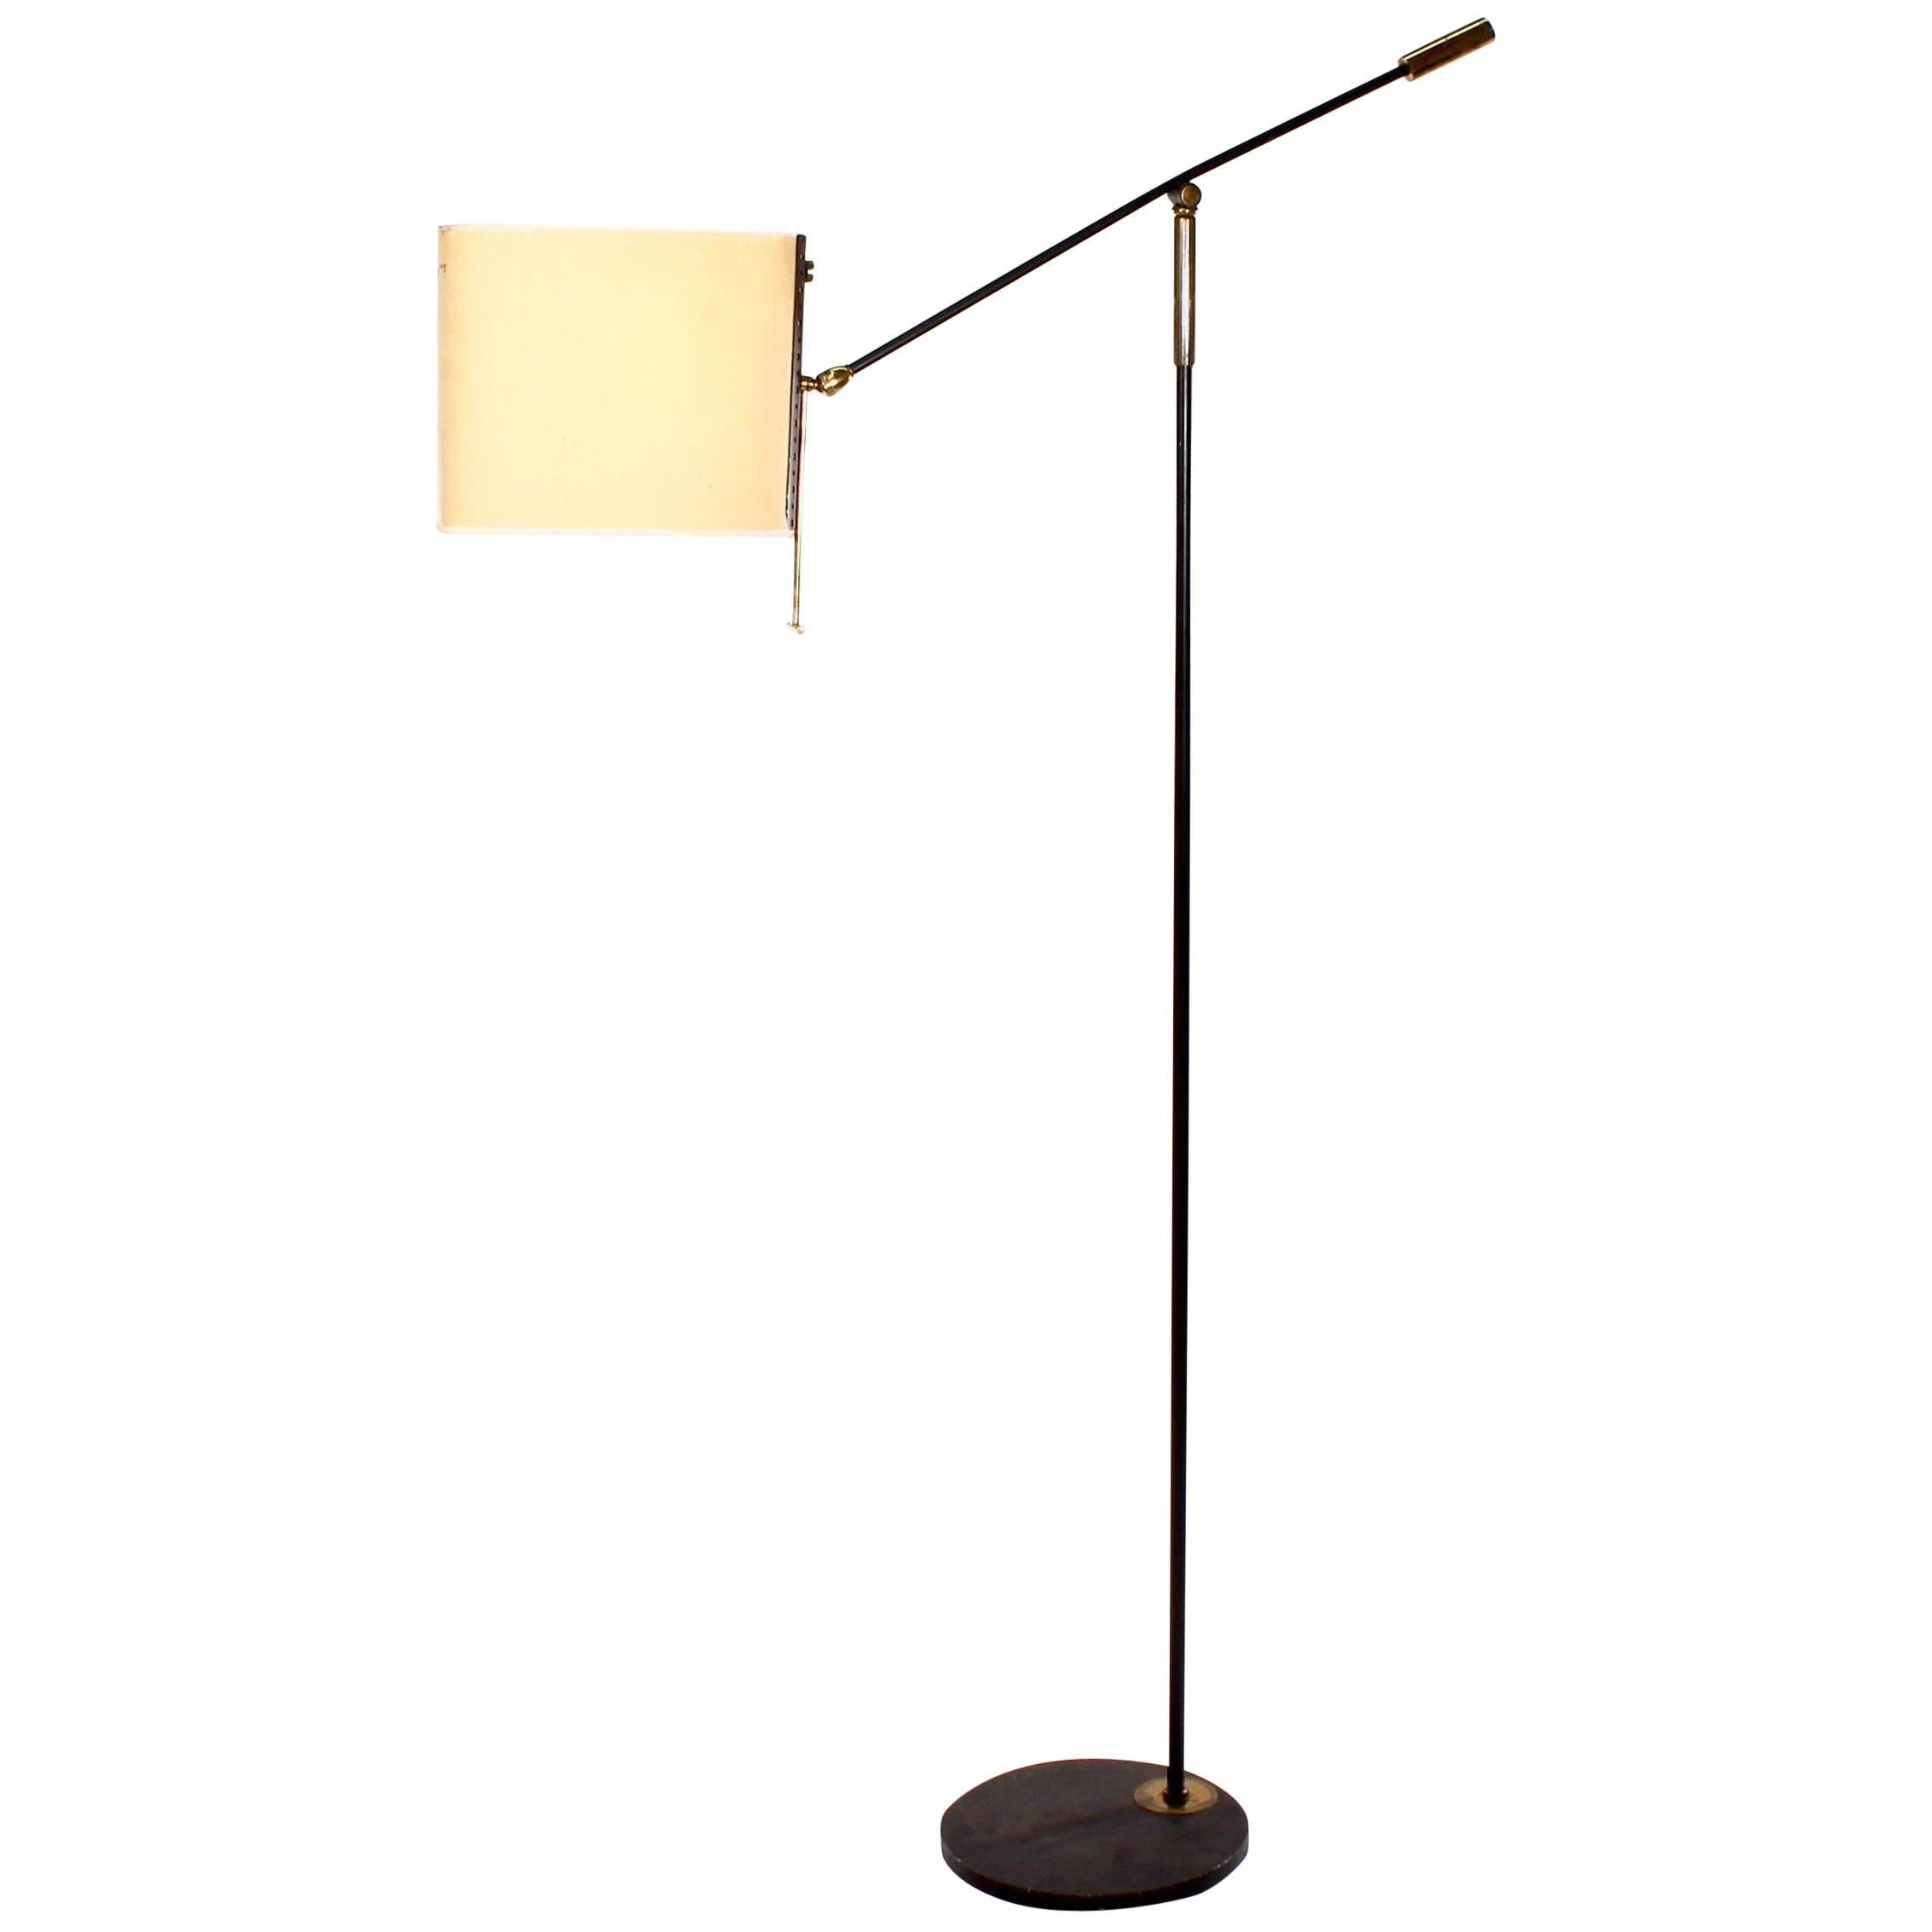 Black Lacquered and Gilt Brass Floor Lamp by Maison Lunel